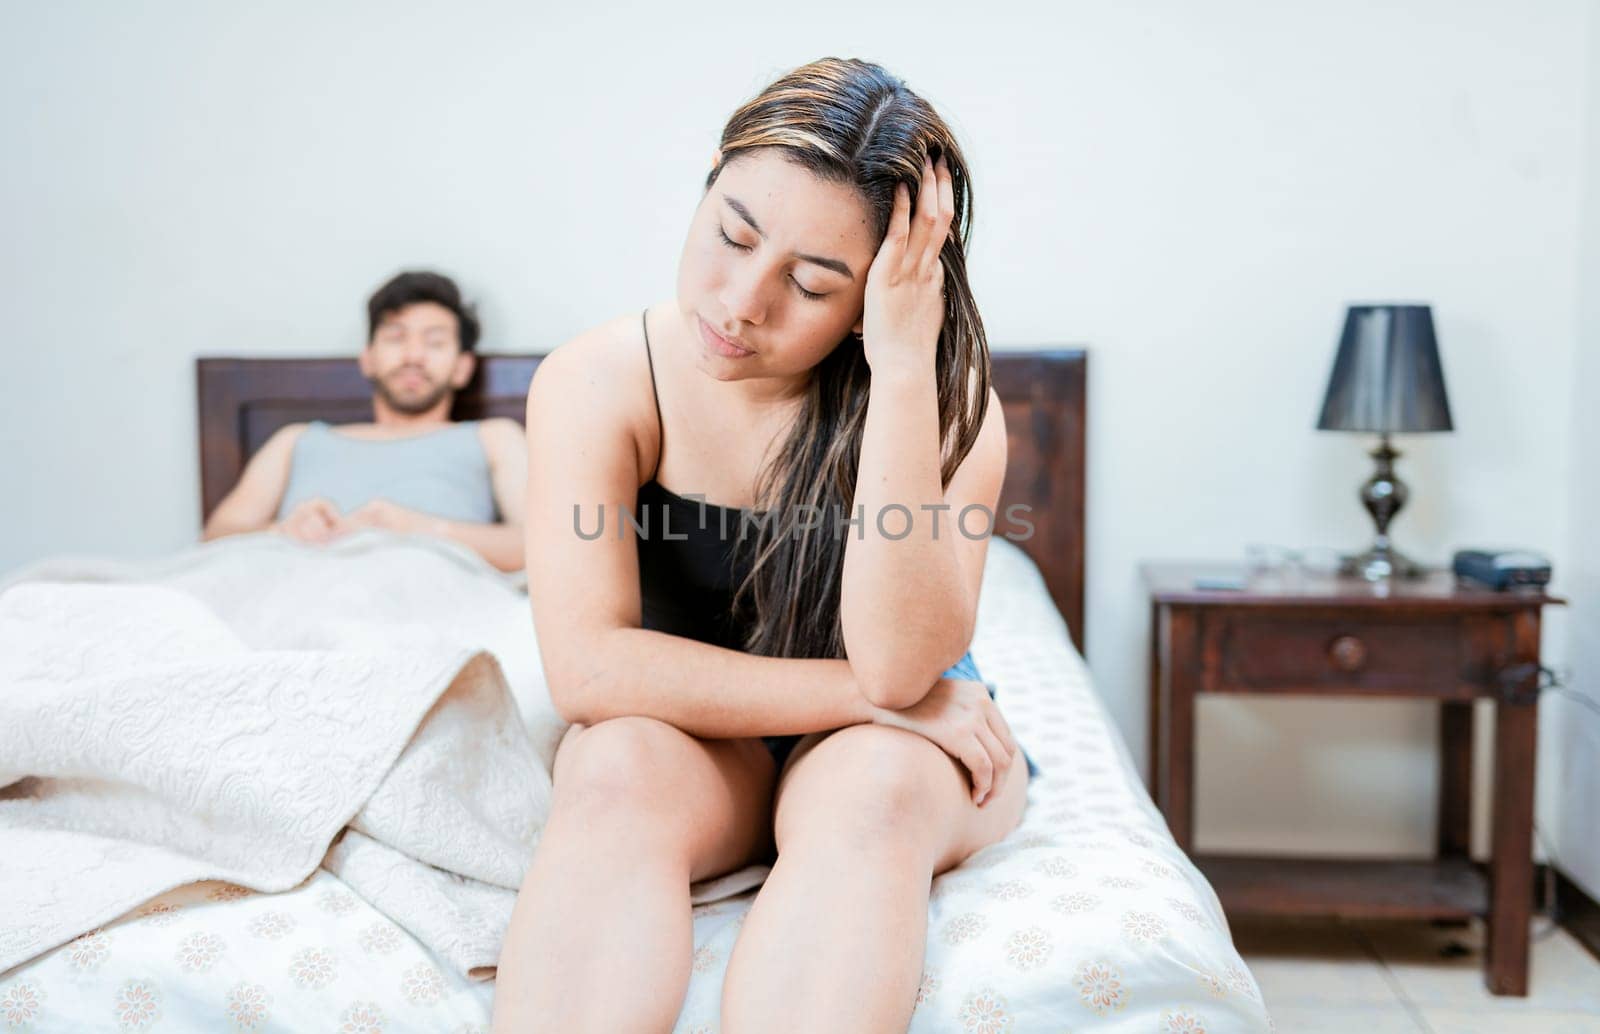 Wife on the edge of the bed arguing with her husband. Upset woman arguing with her husband in bed. Concept of couple problems in bed by isaiphoto